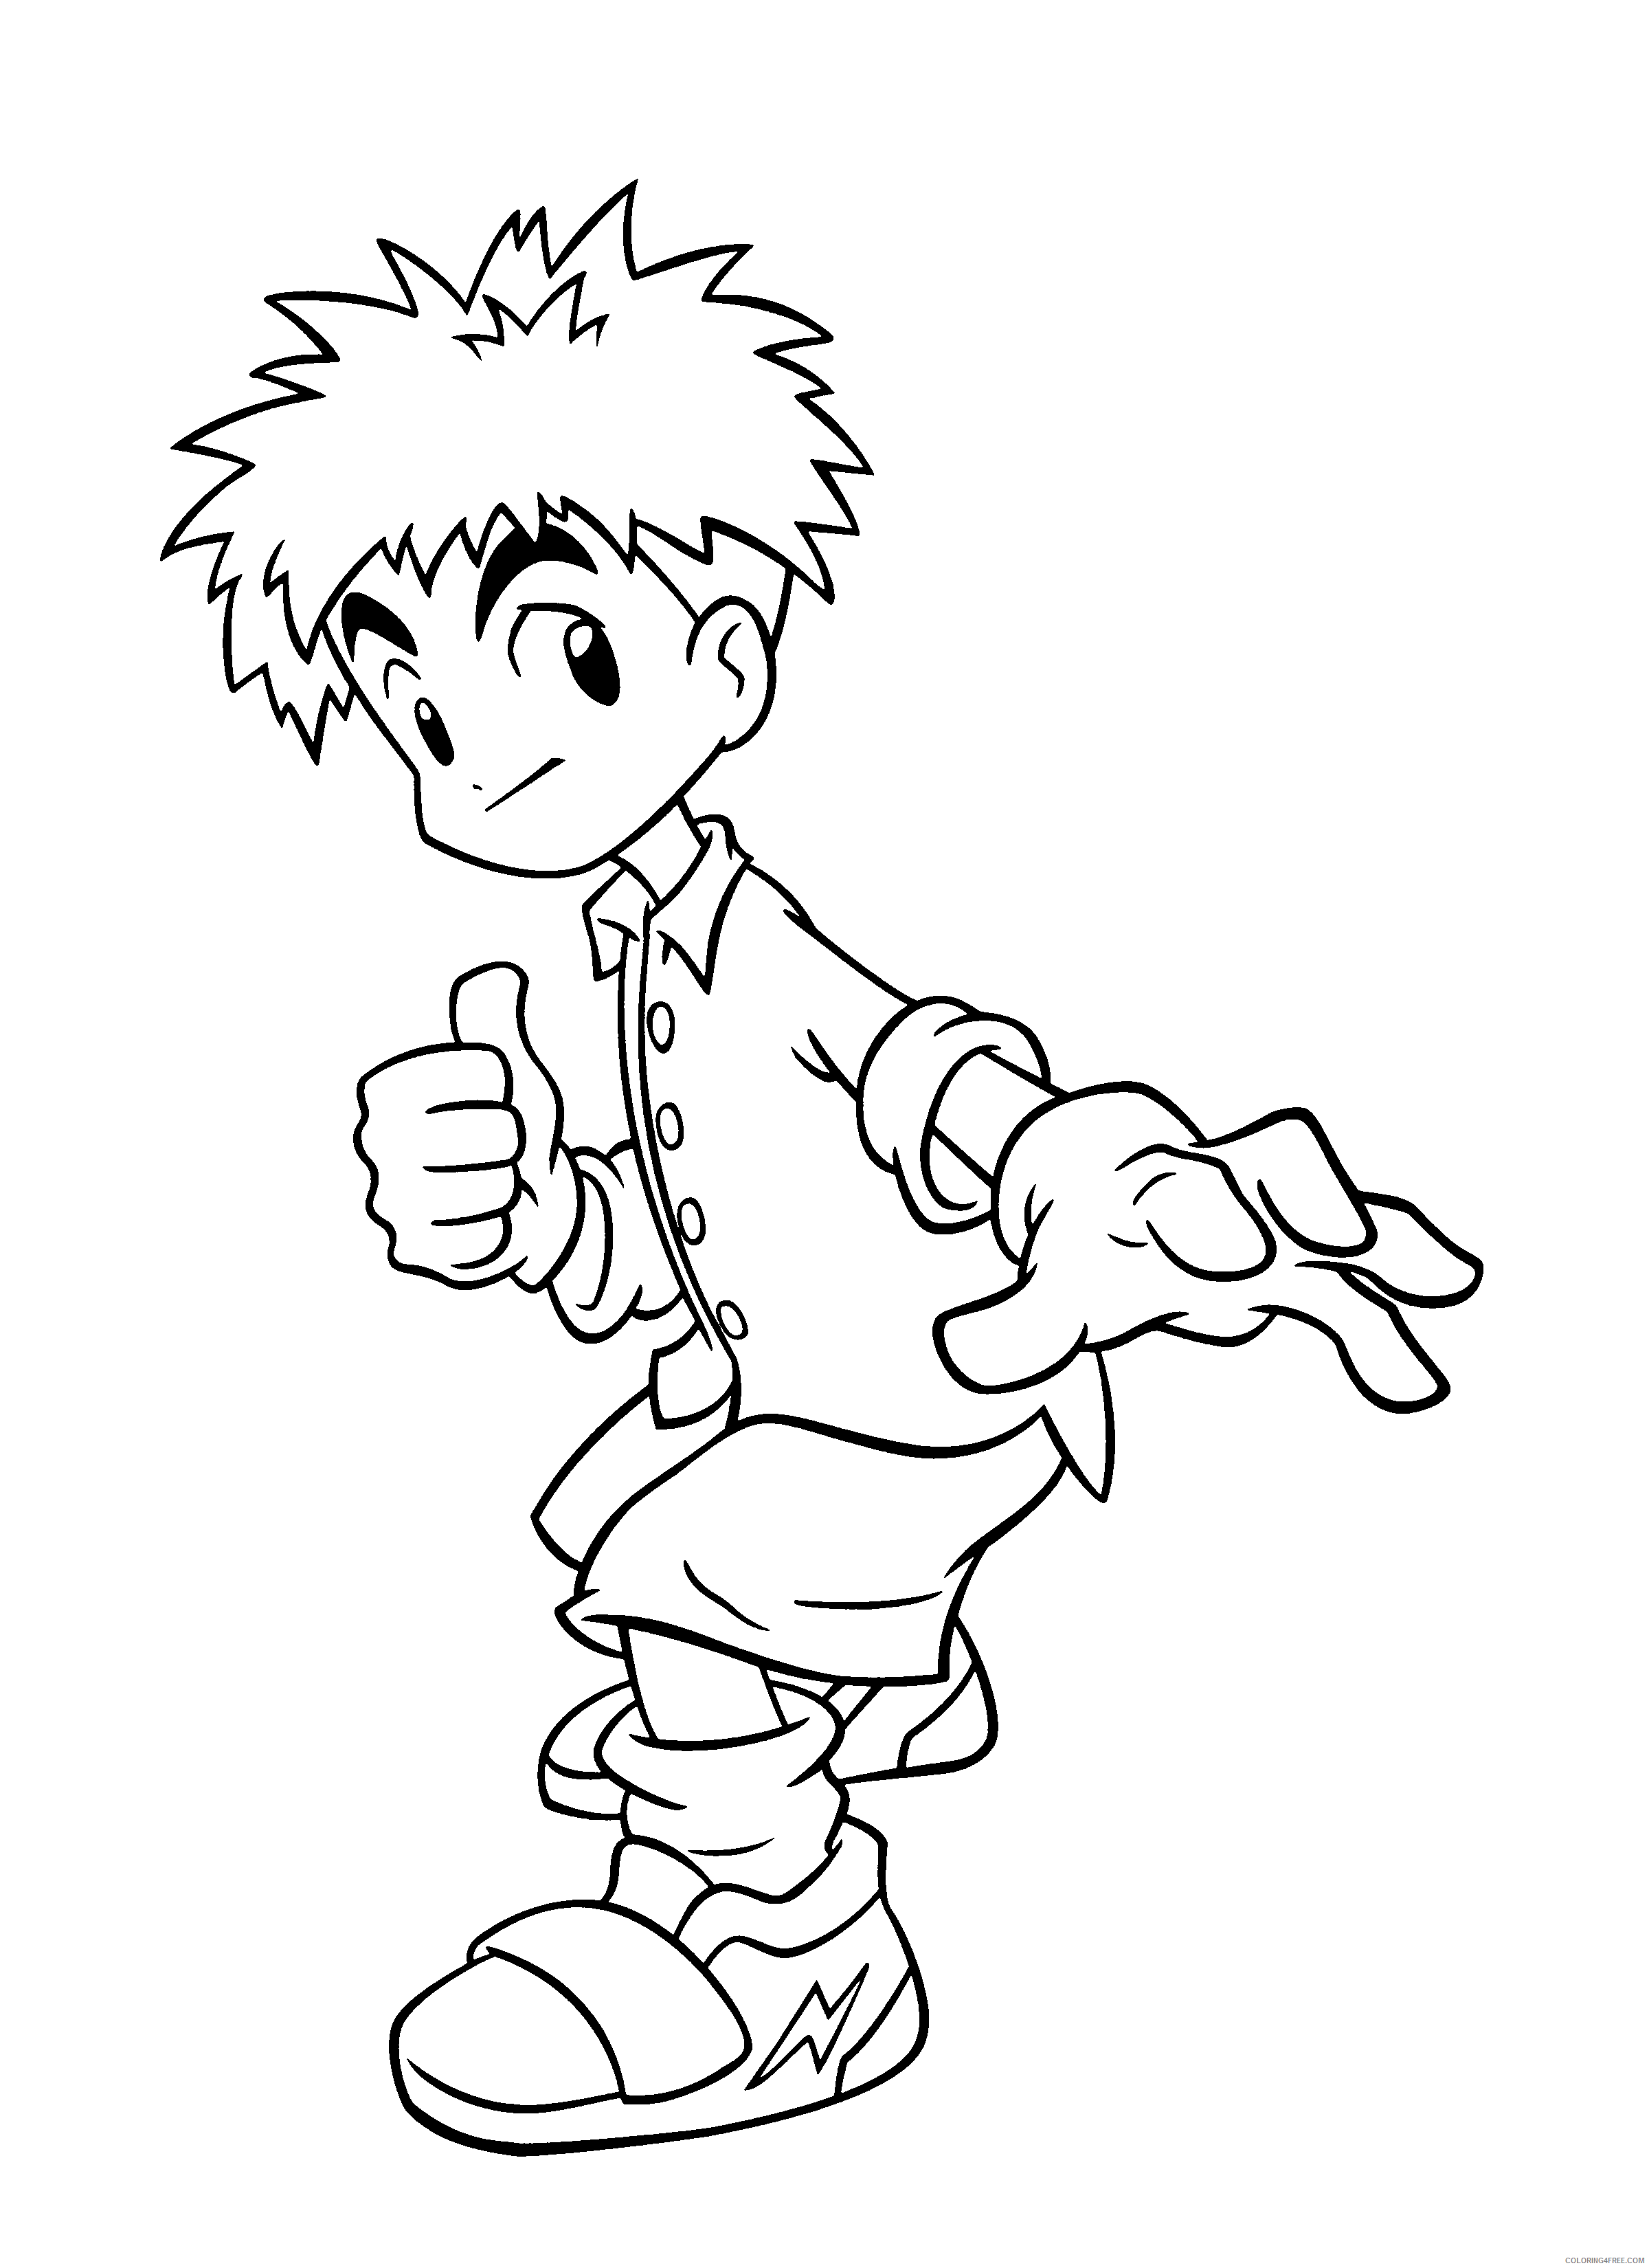 Digimon Printable Coloring Pages Anime digimon 217 2021 0300 Coloring4free